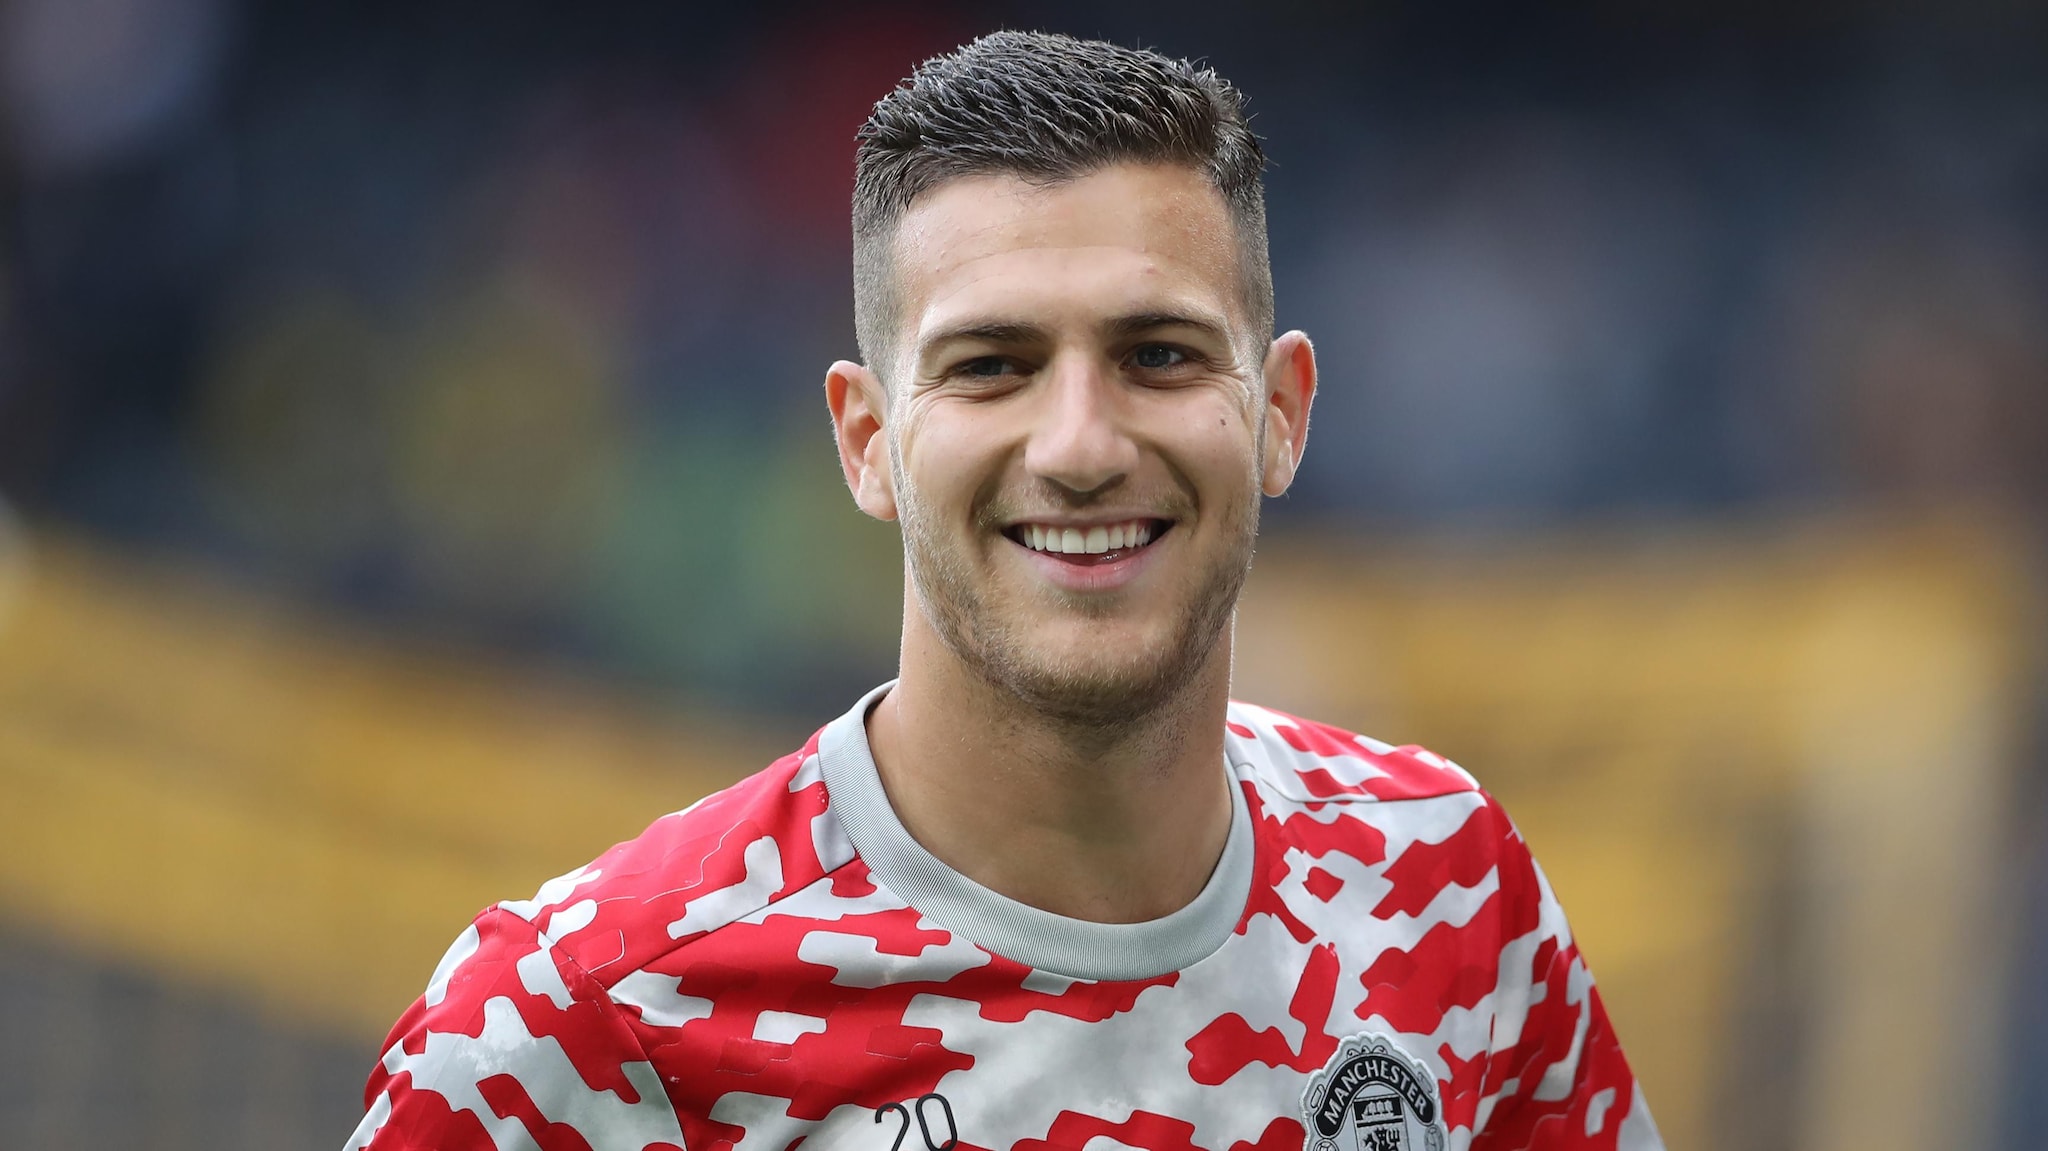 Diogo Dalot of Manchester United talks about working with Ralf Rangnick, learning at Porto, and facing Atlético de Madrid in the final 16 of the UEFA Champions League.